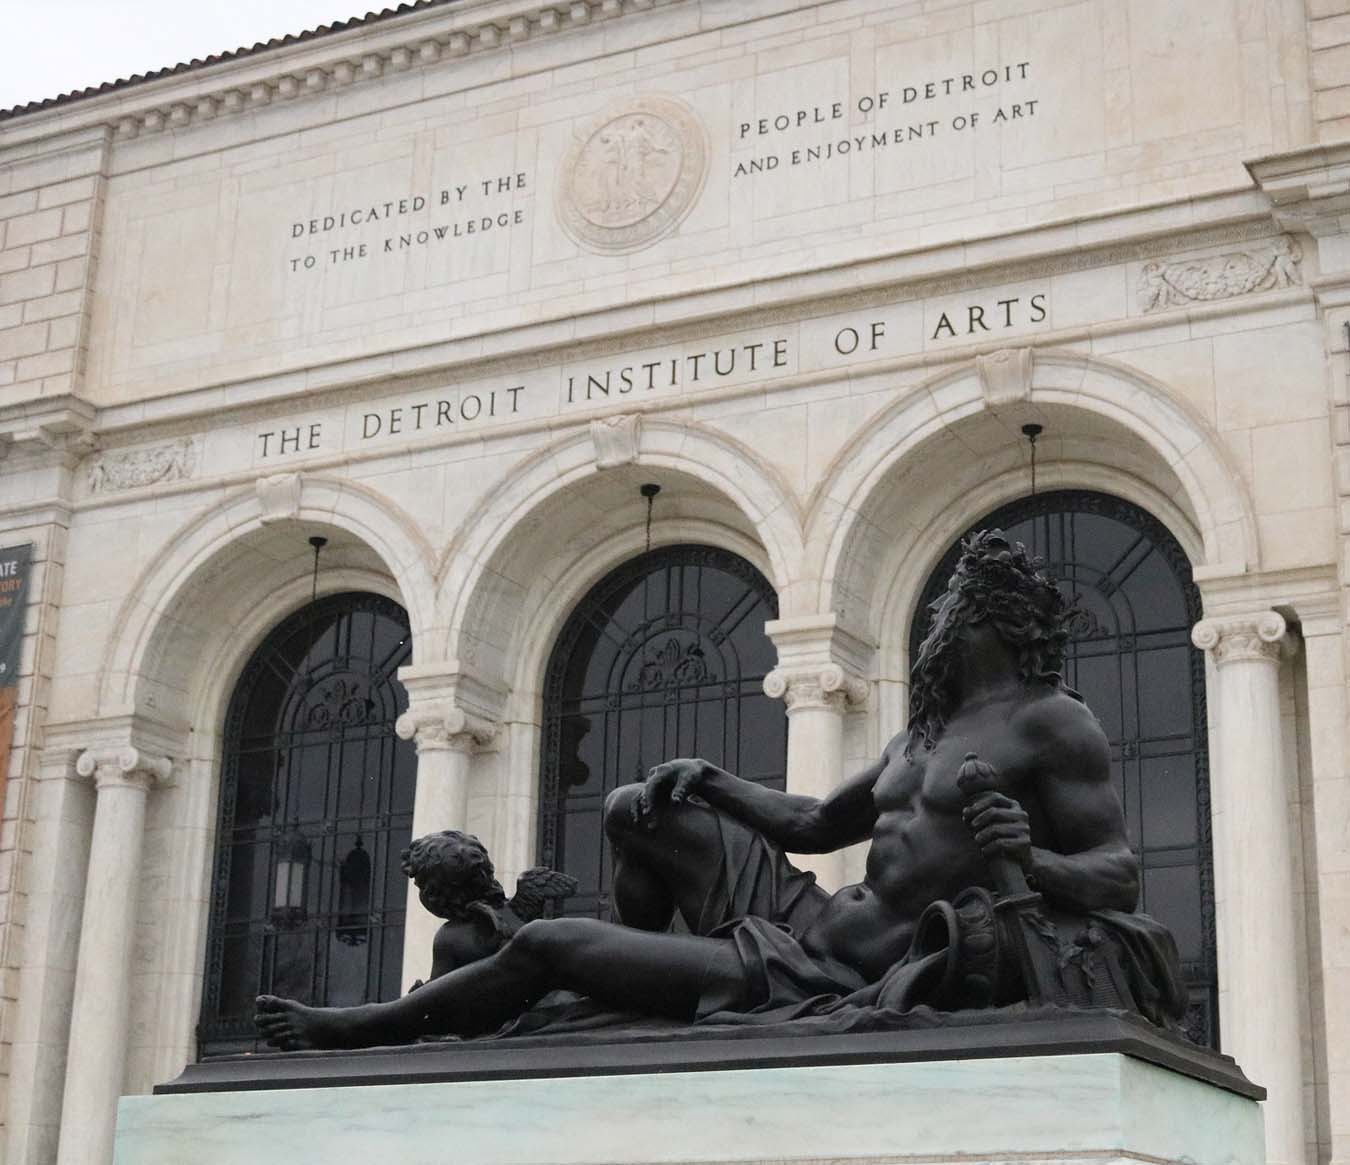 Things to Do in Detroit - Detroit Institute of Arts